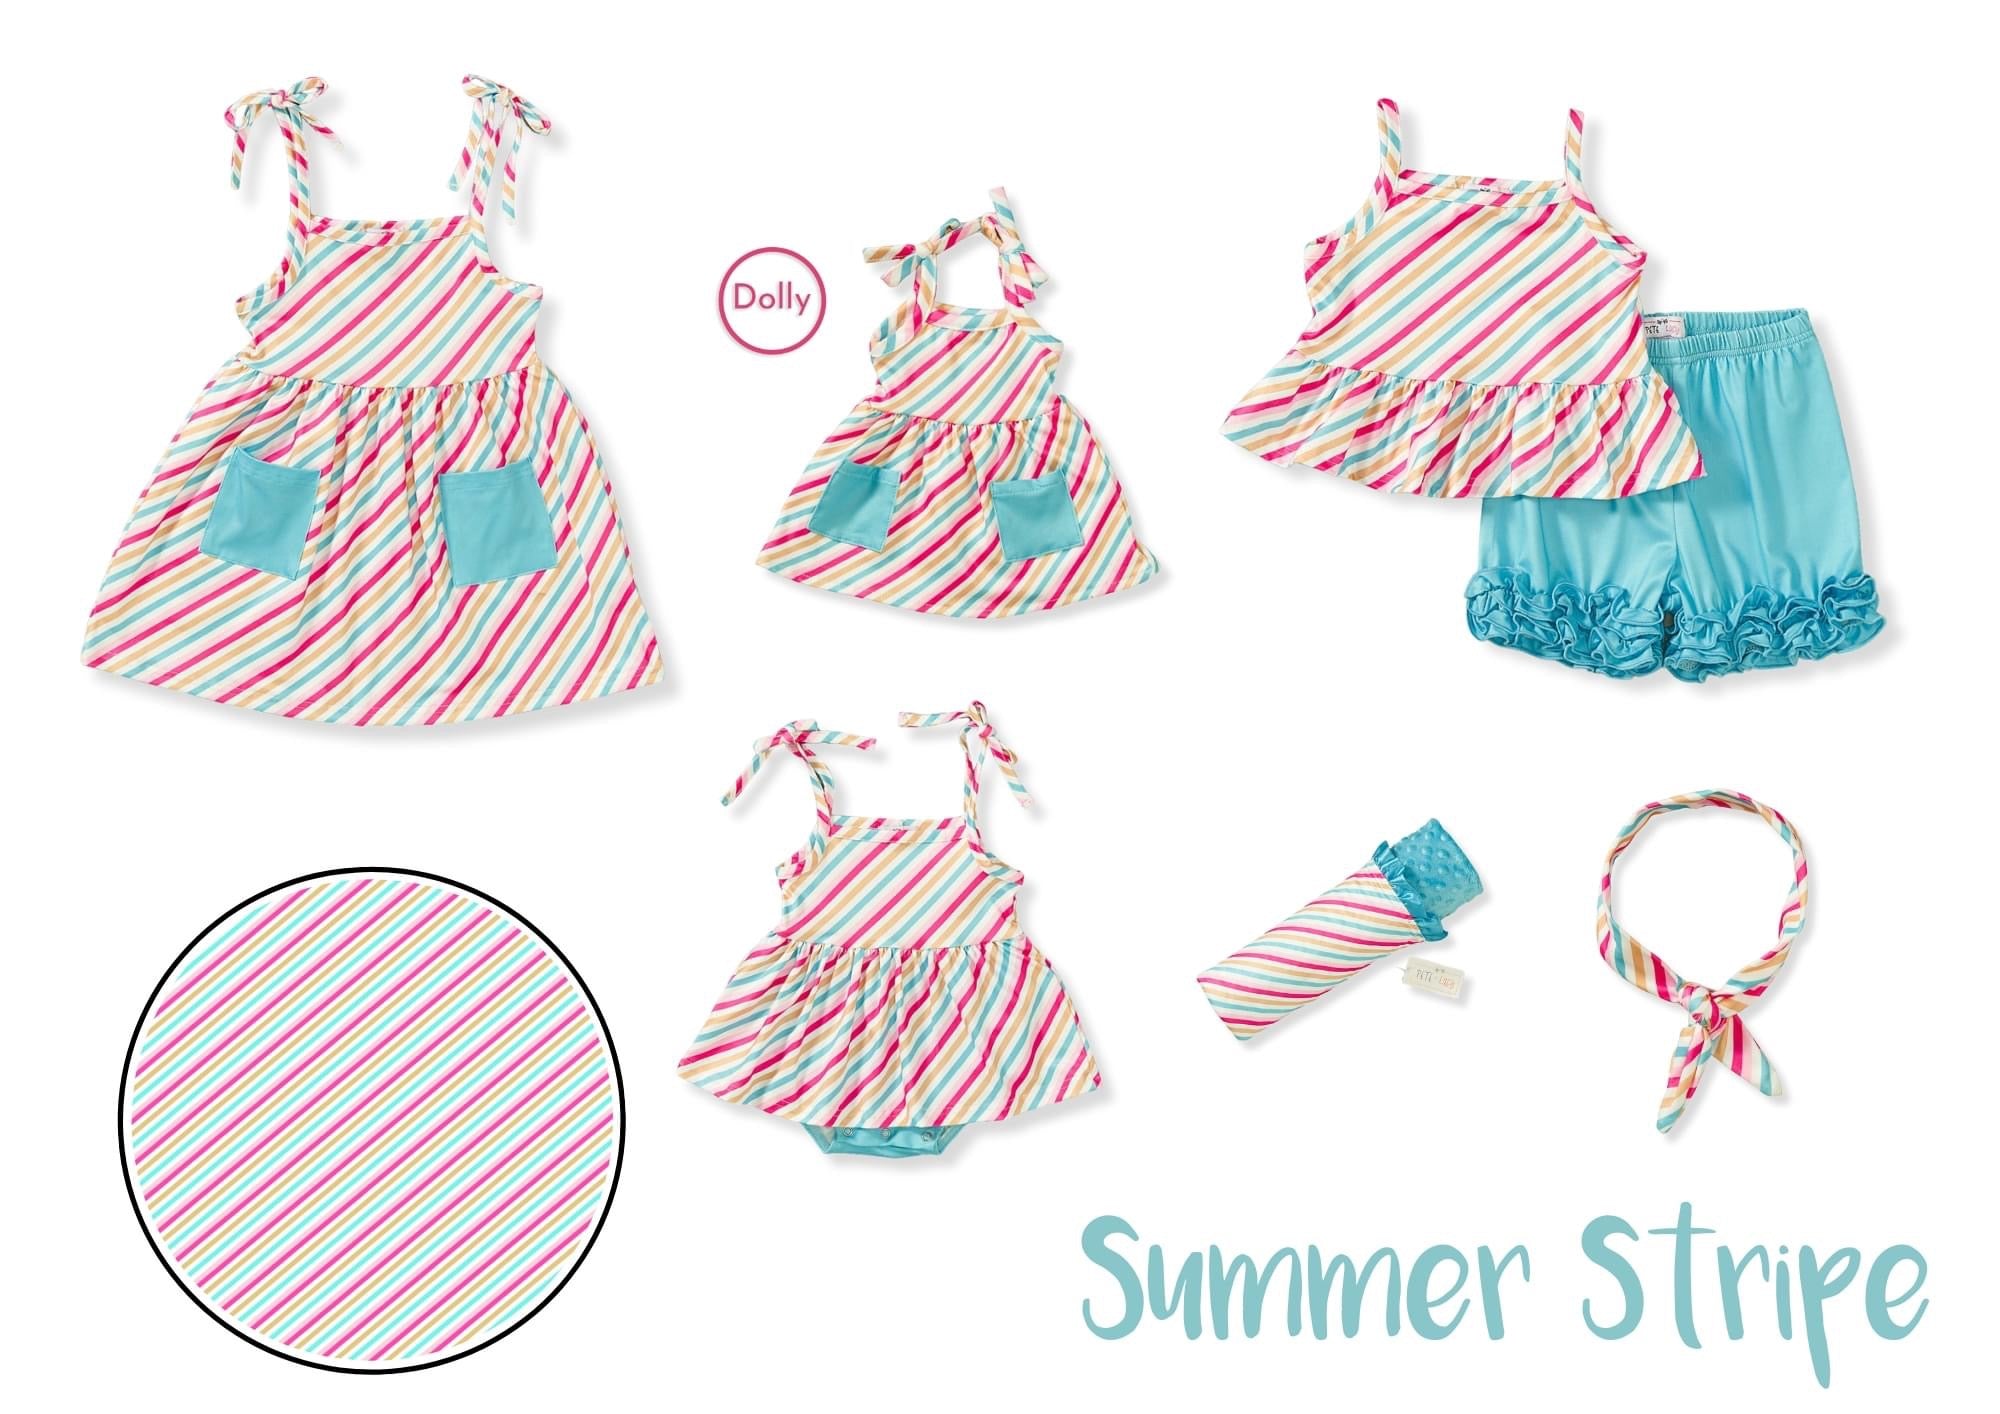 Summer Stripes Dolly Dress by Pete and Lucy